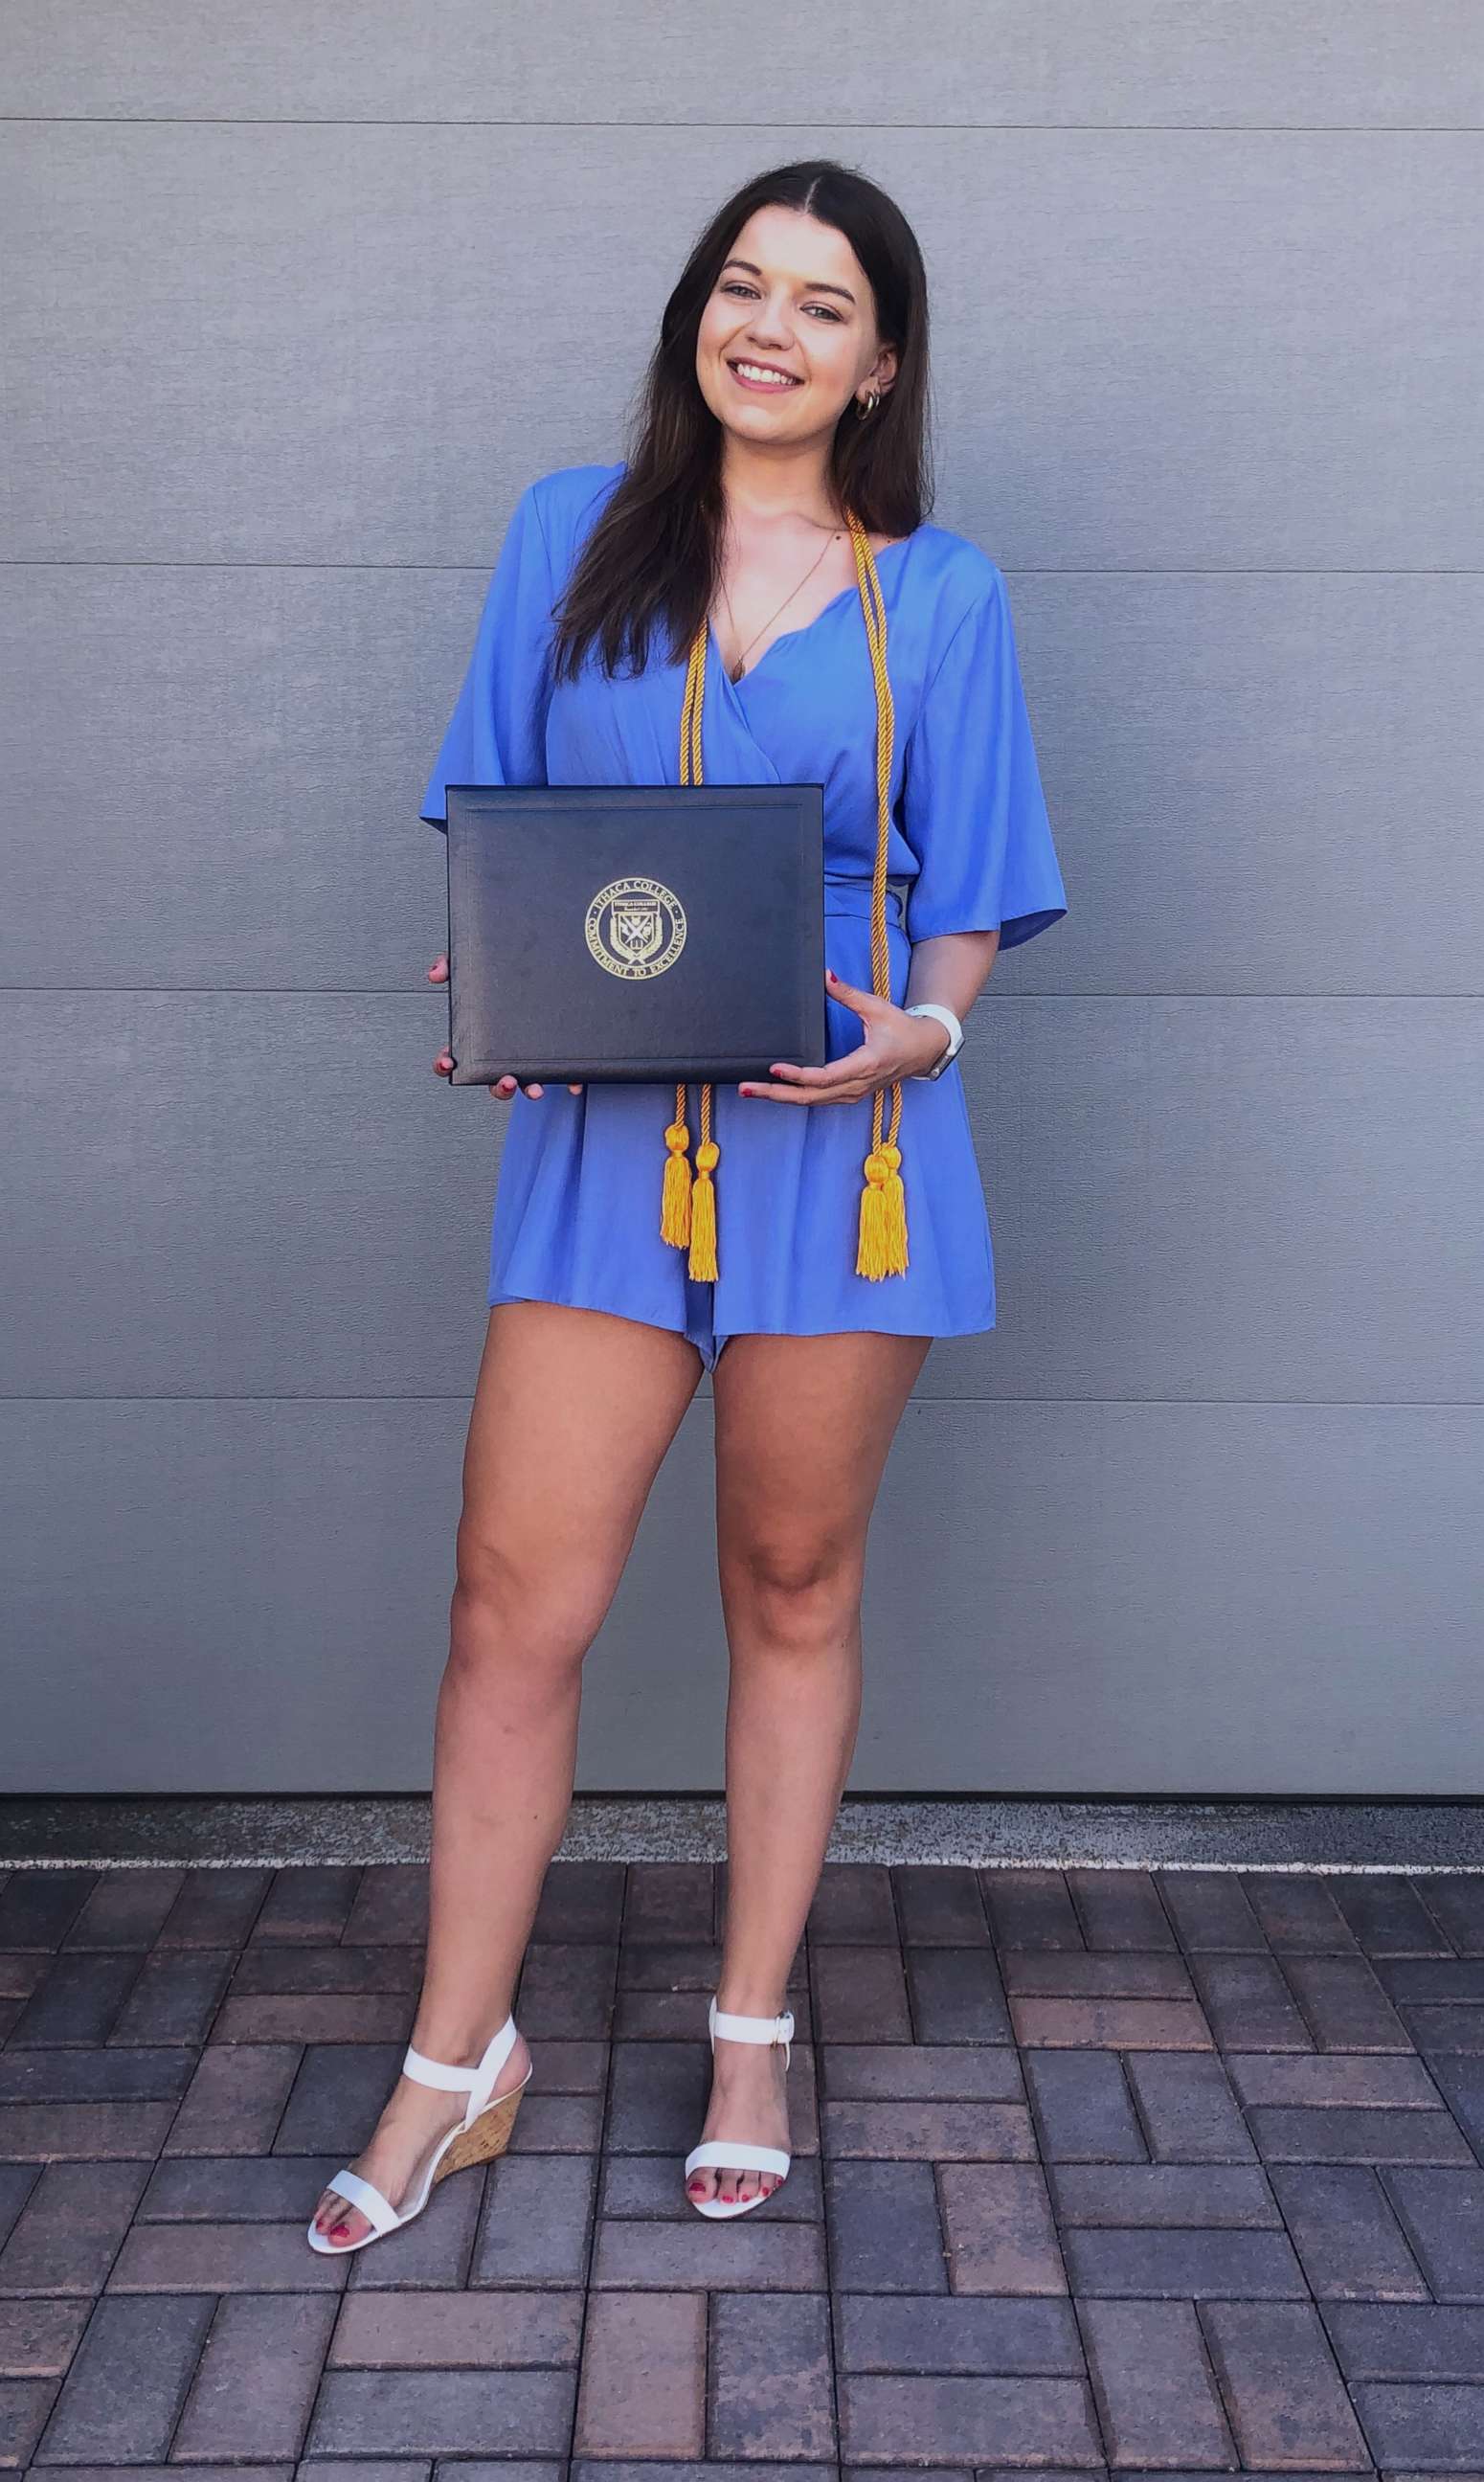 PHOTO: Marissa Ellis poses with her diploma from Ithaca College in an undated photo.